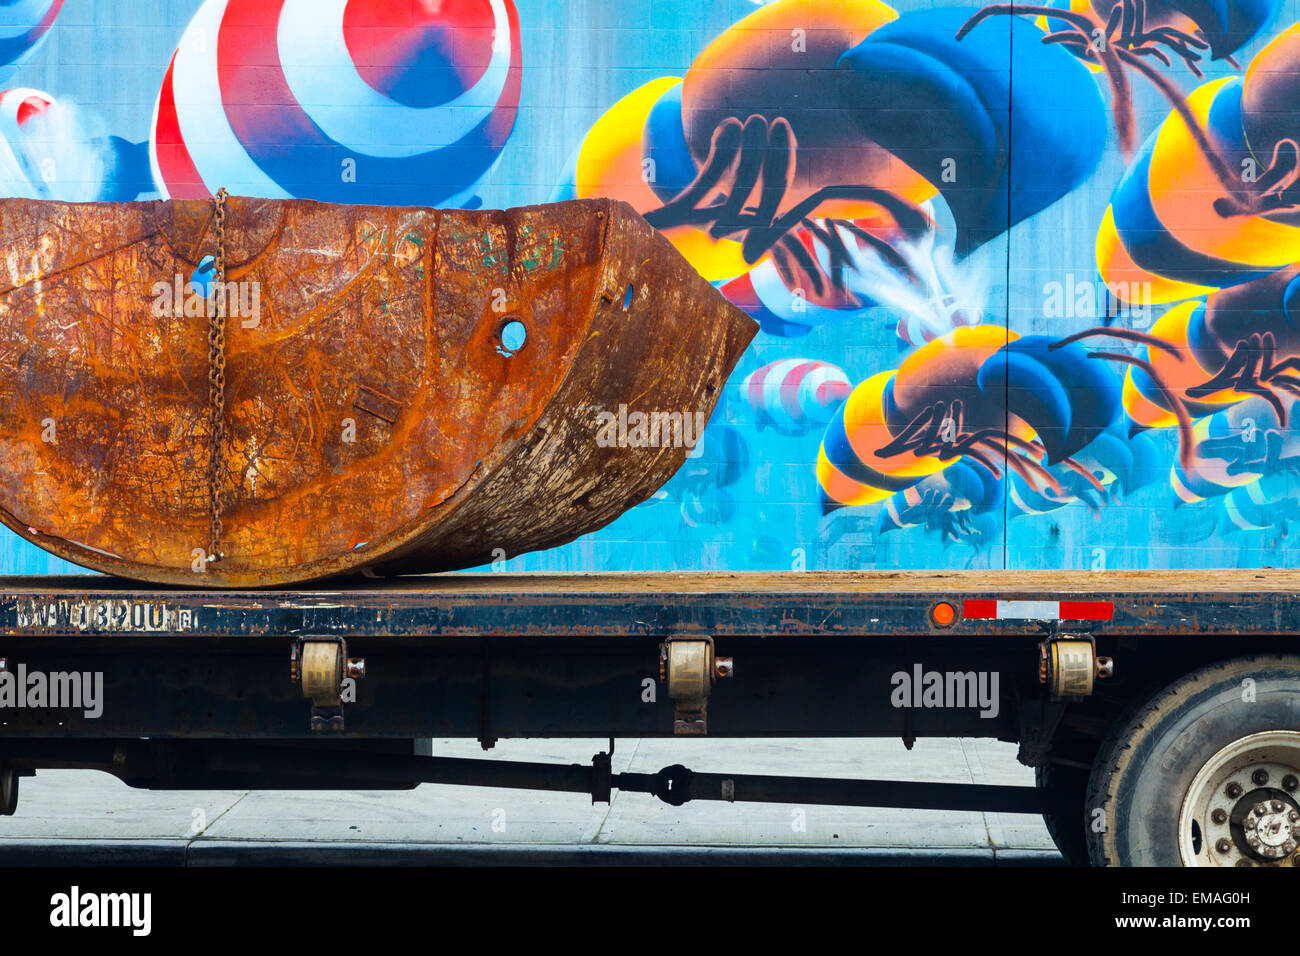 Abstract image of a flat bed truck with a rusting load with painted bees in the background Stock Photo